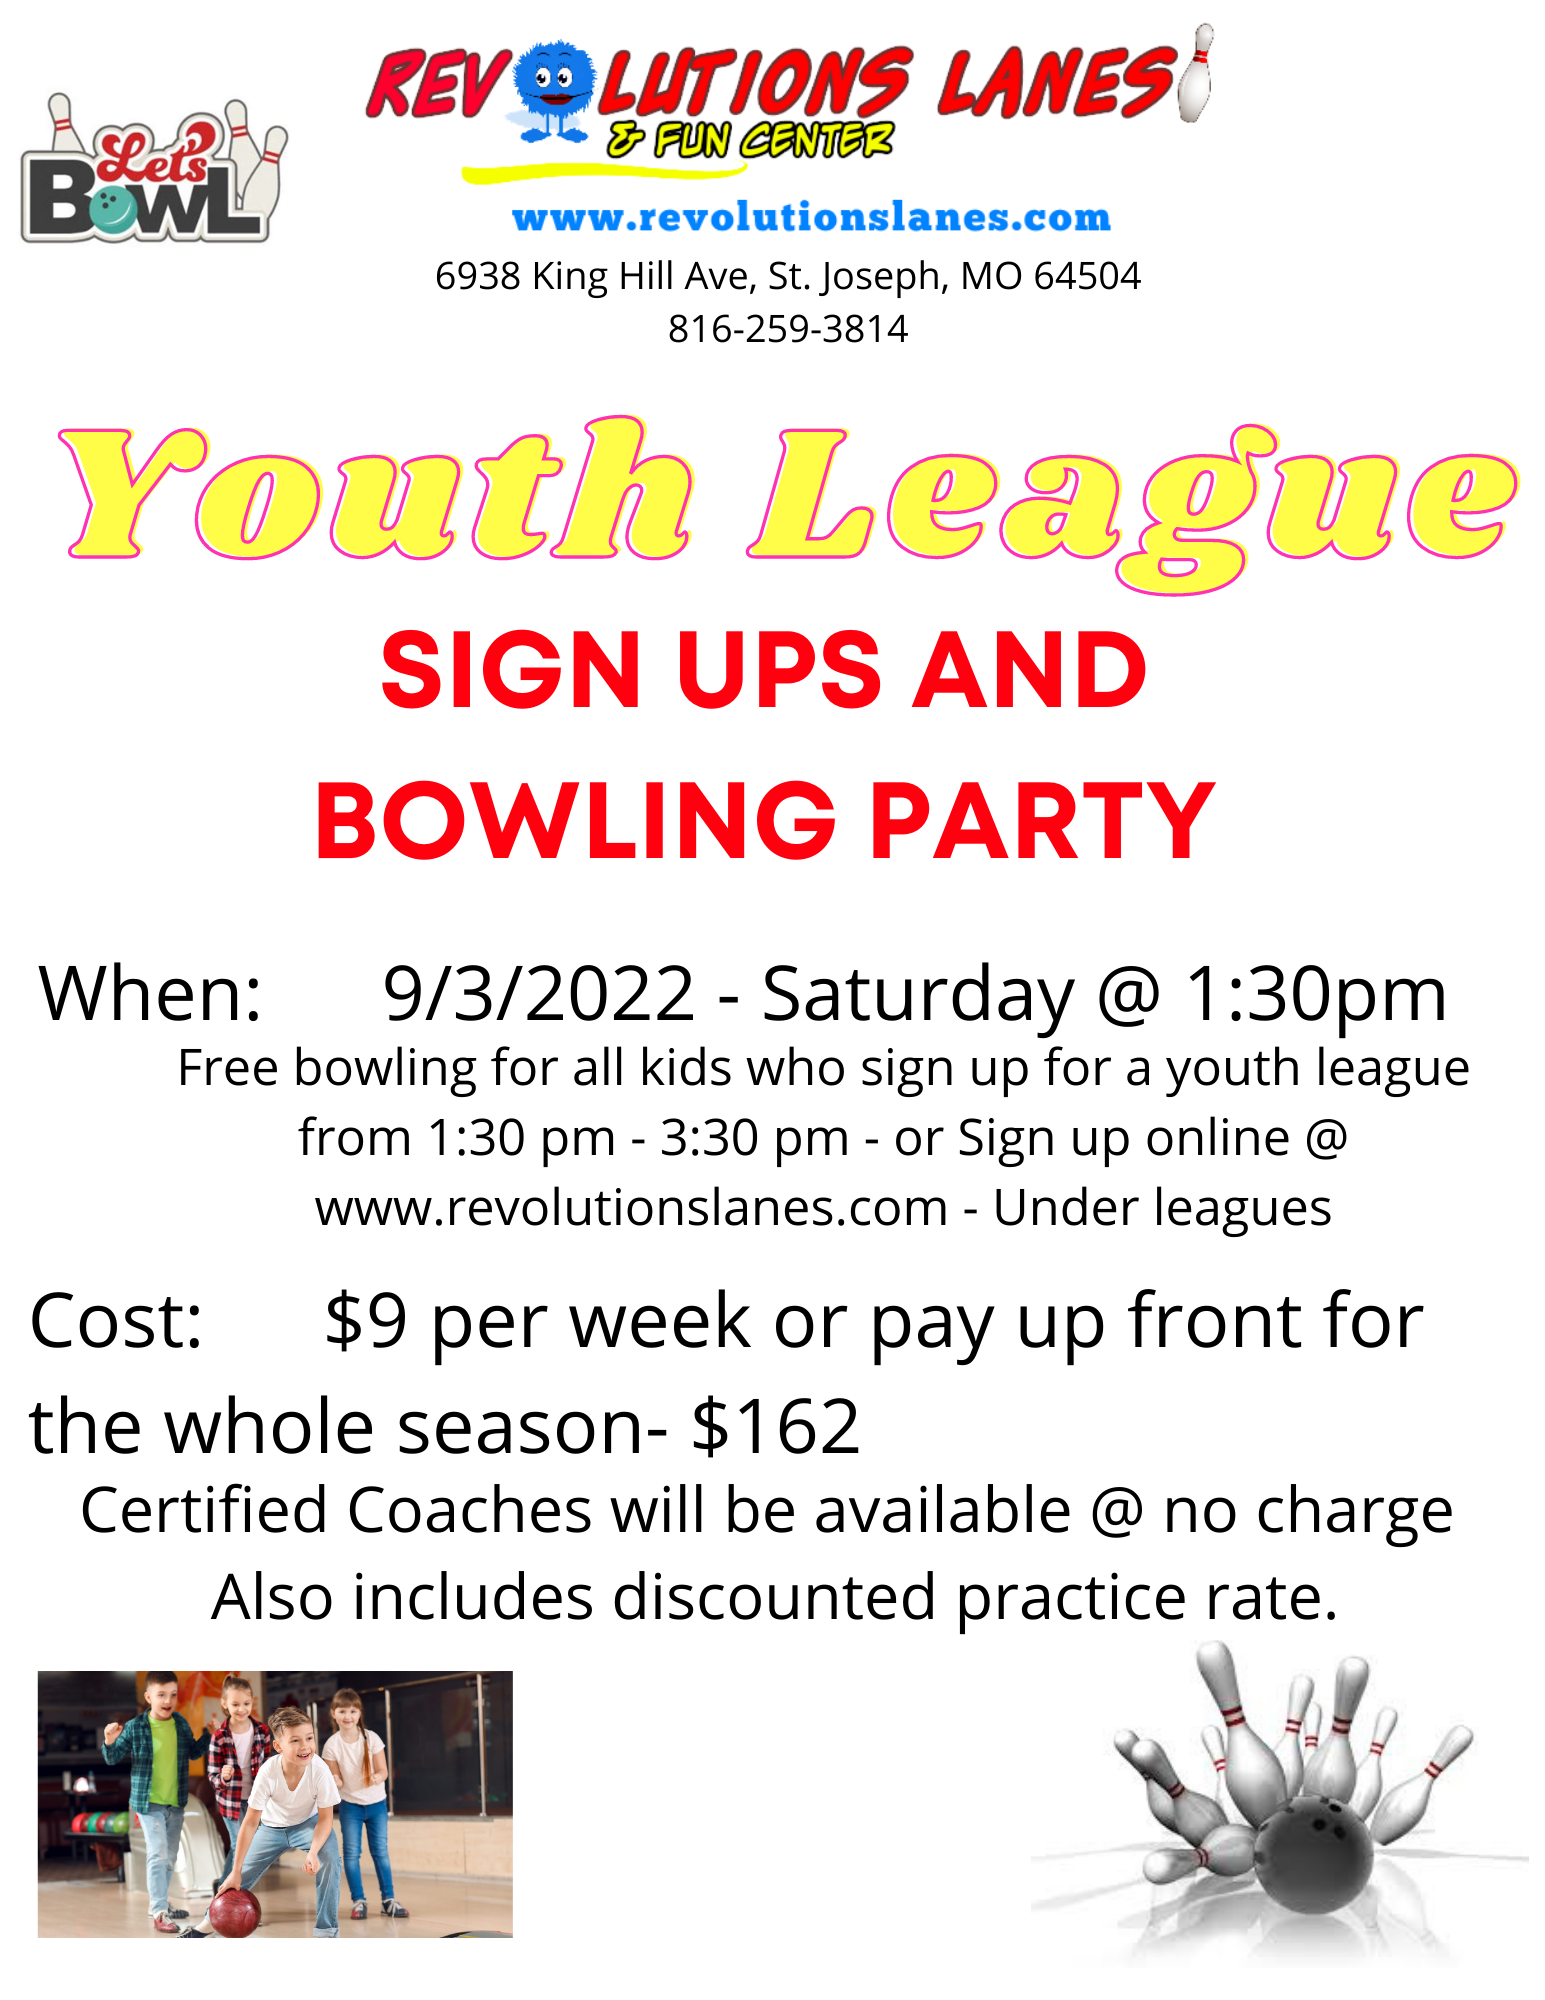 Adult youth leagues